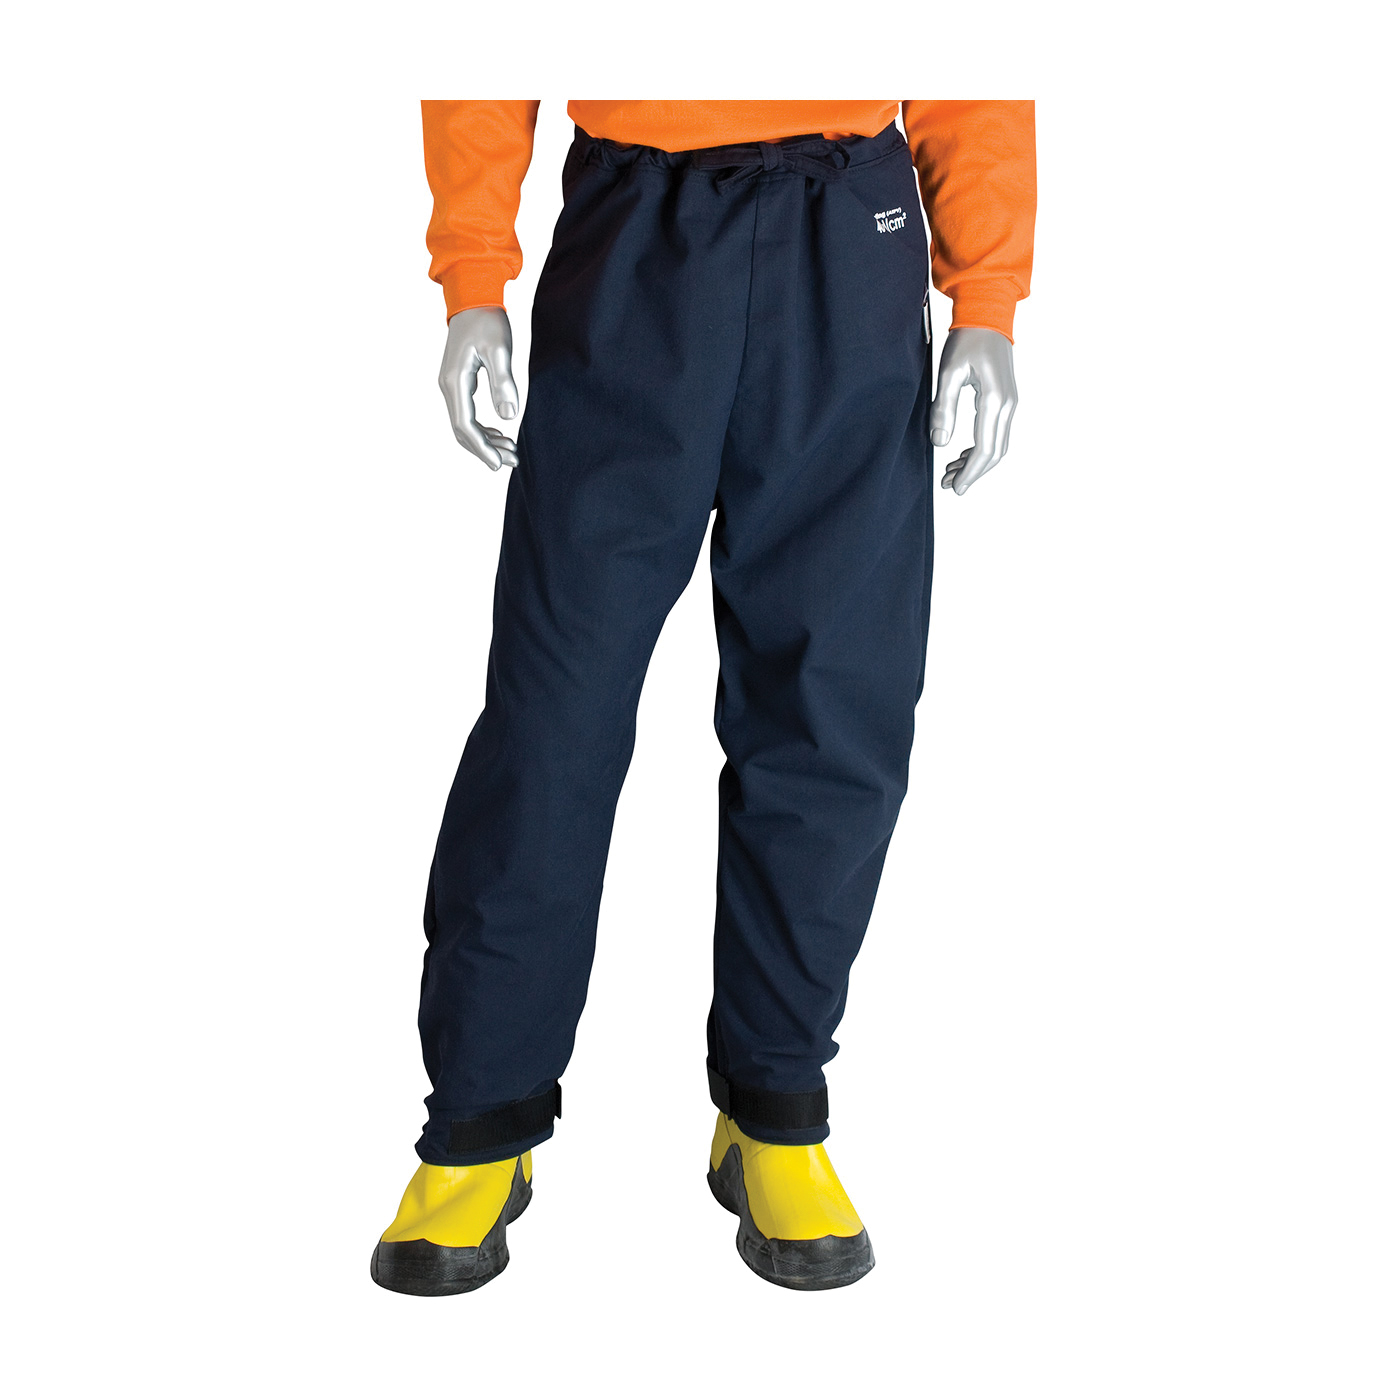 PIP® 9100-530ULT/S 9100-530ULT Ultralight Flame Resistant Pant, 32 to 34 in Waist, 32 in L Inseam, Navy Blue, DuPont™ Protera®/Westex® UltraSoft® Interlock Knit